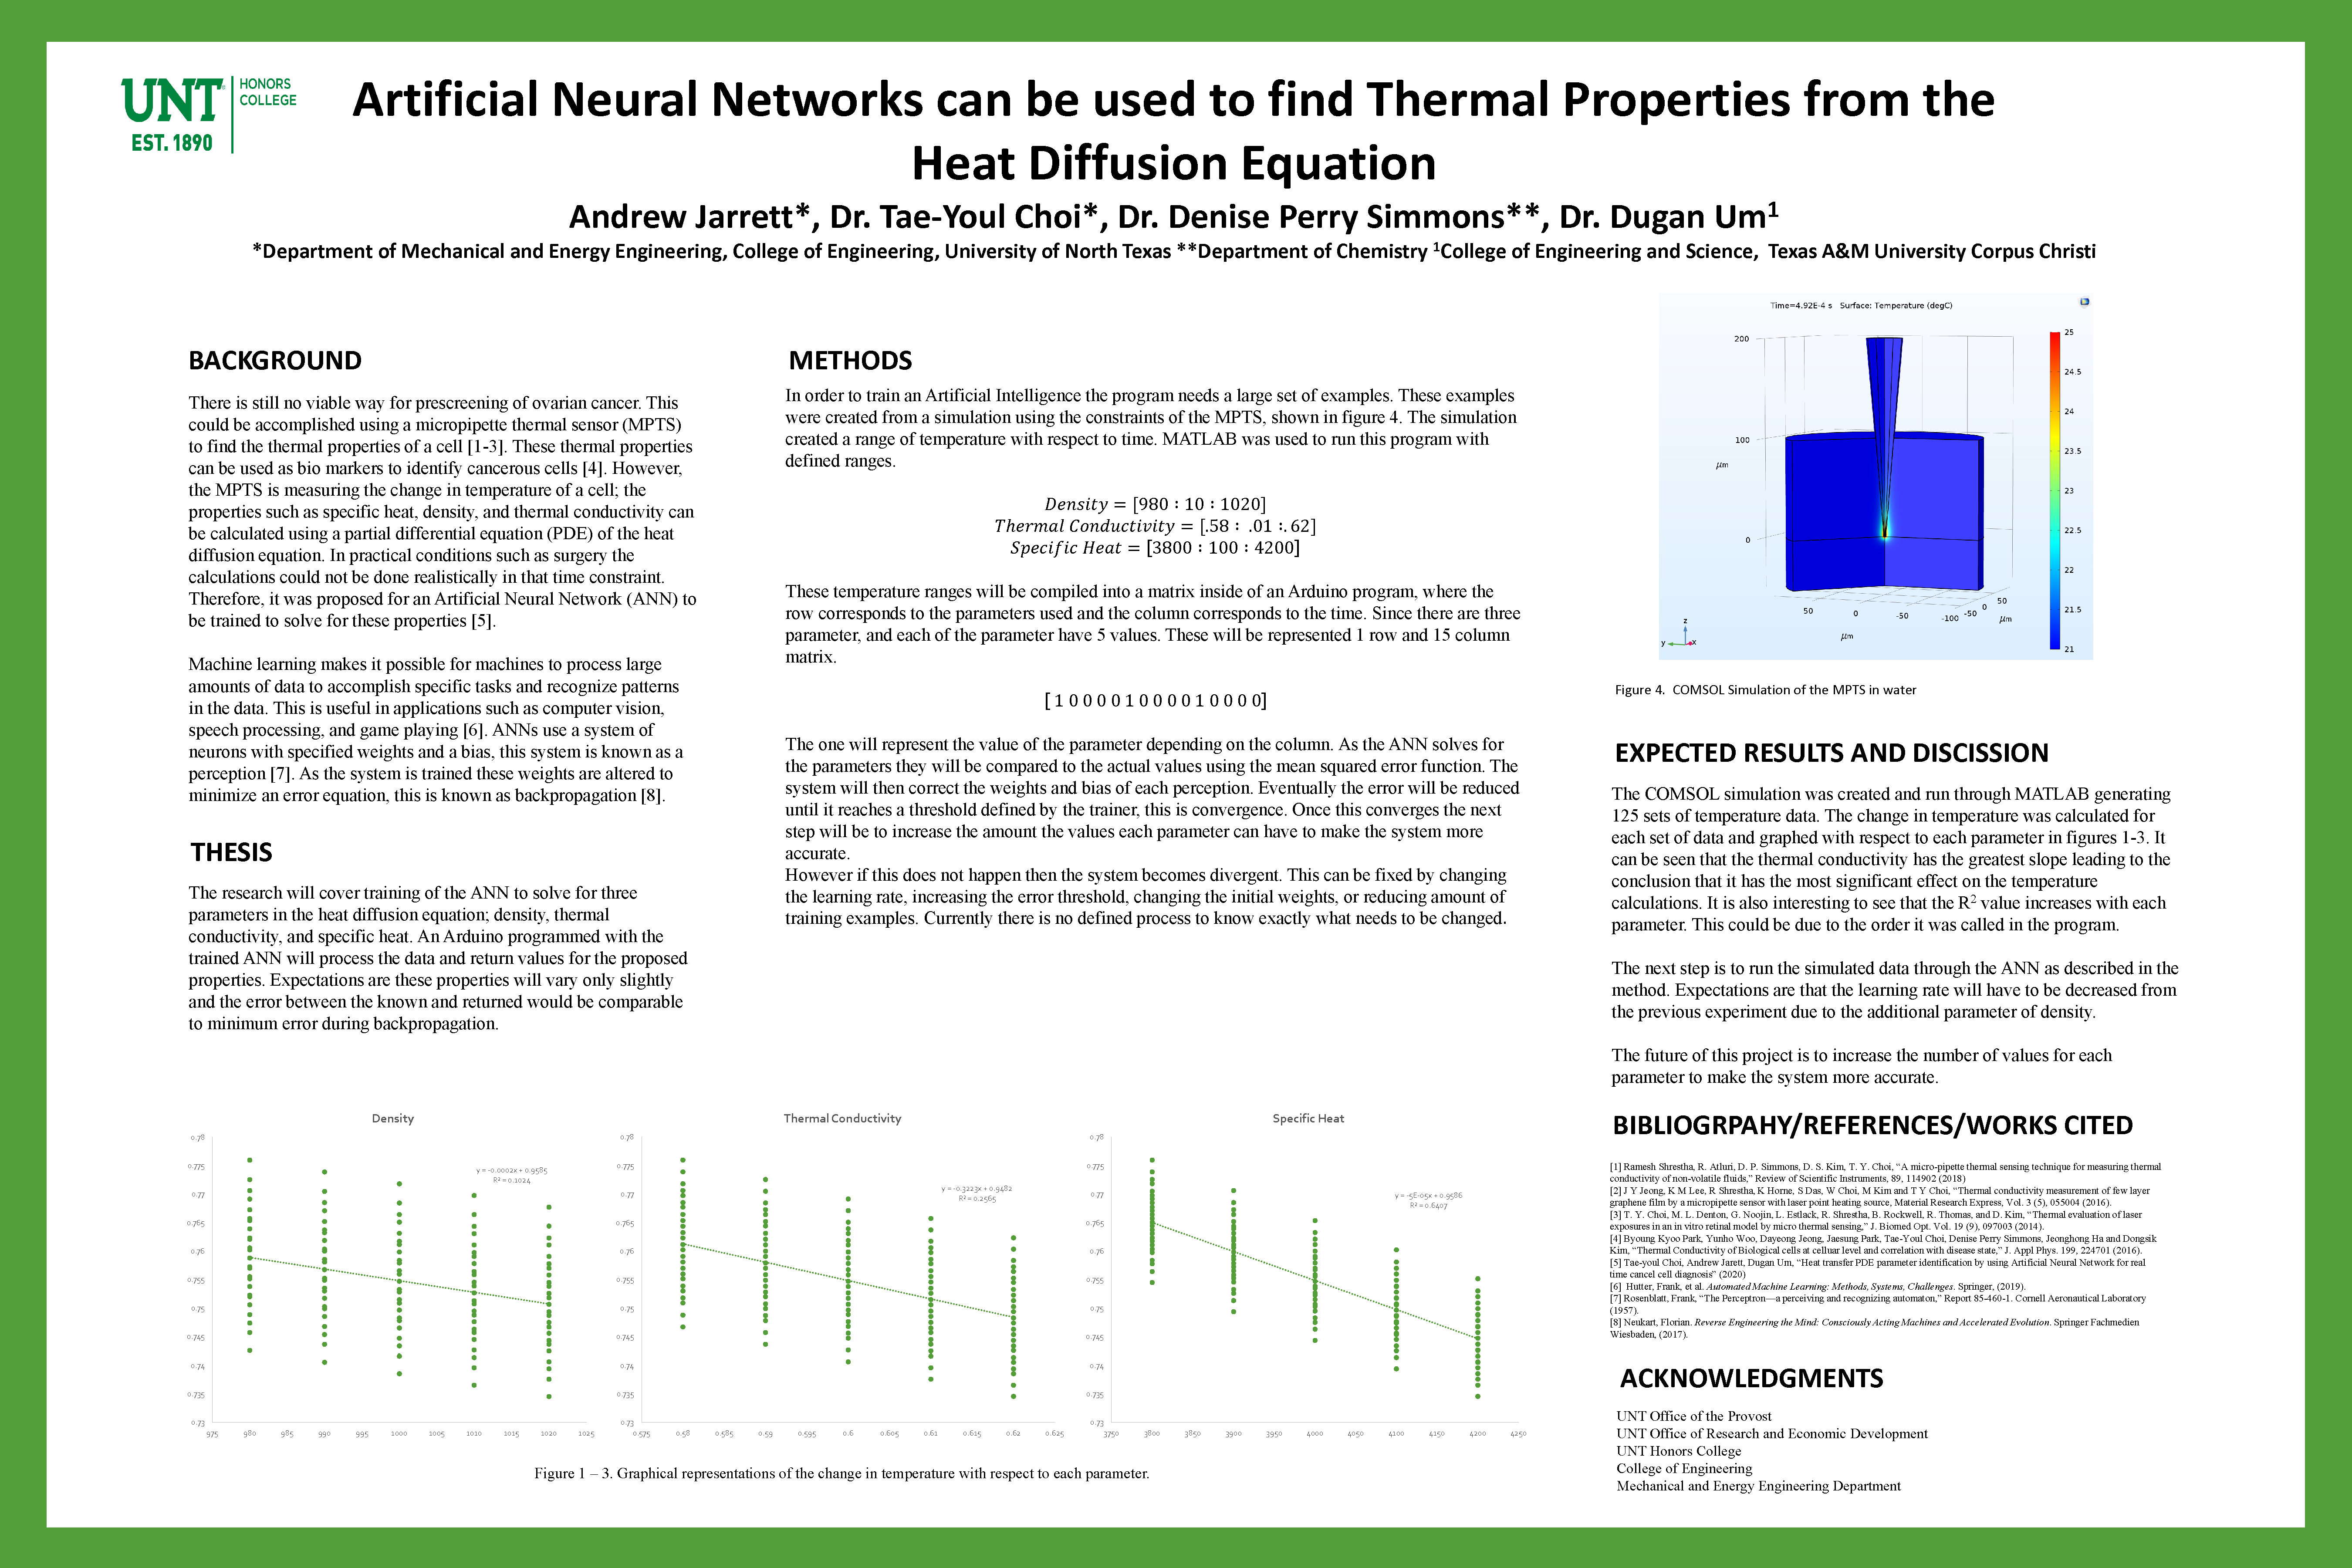 Artificial Neural Networks can be used to find Thermal Properties from the Heat Diffusion Equation